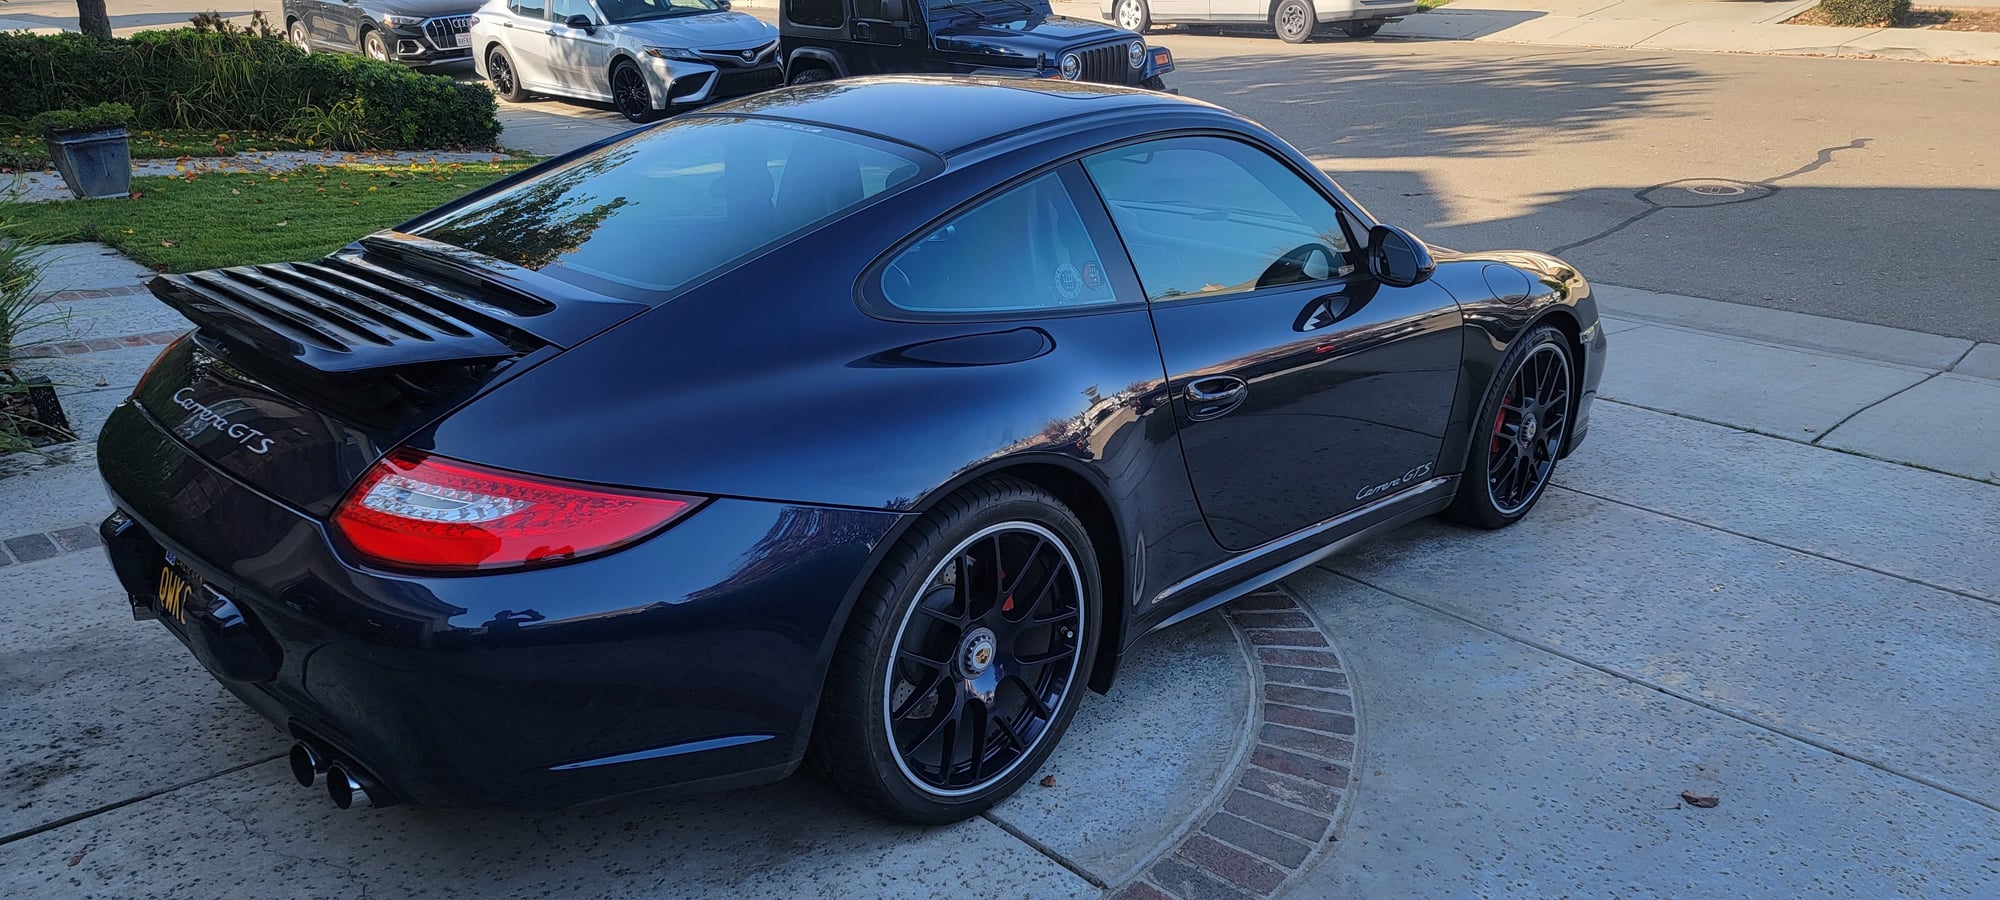 2011 Porsche 911 - 2011 Porsche 997.2 GTS 2WD work manual trans - Used - VIN Vin WP0AB2A97BS72 - 40,400 Miles - 6 cyl - 2WD - Manual - Coupe - Blue - Tracy, CA 95377, United States